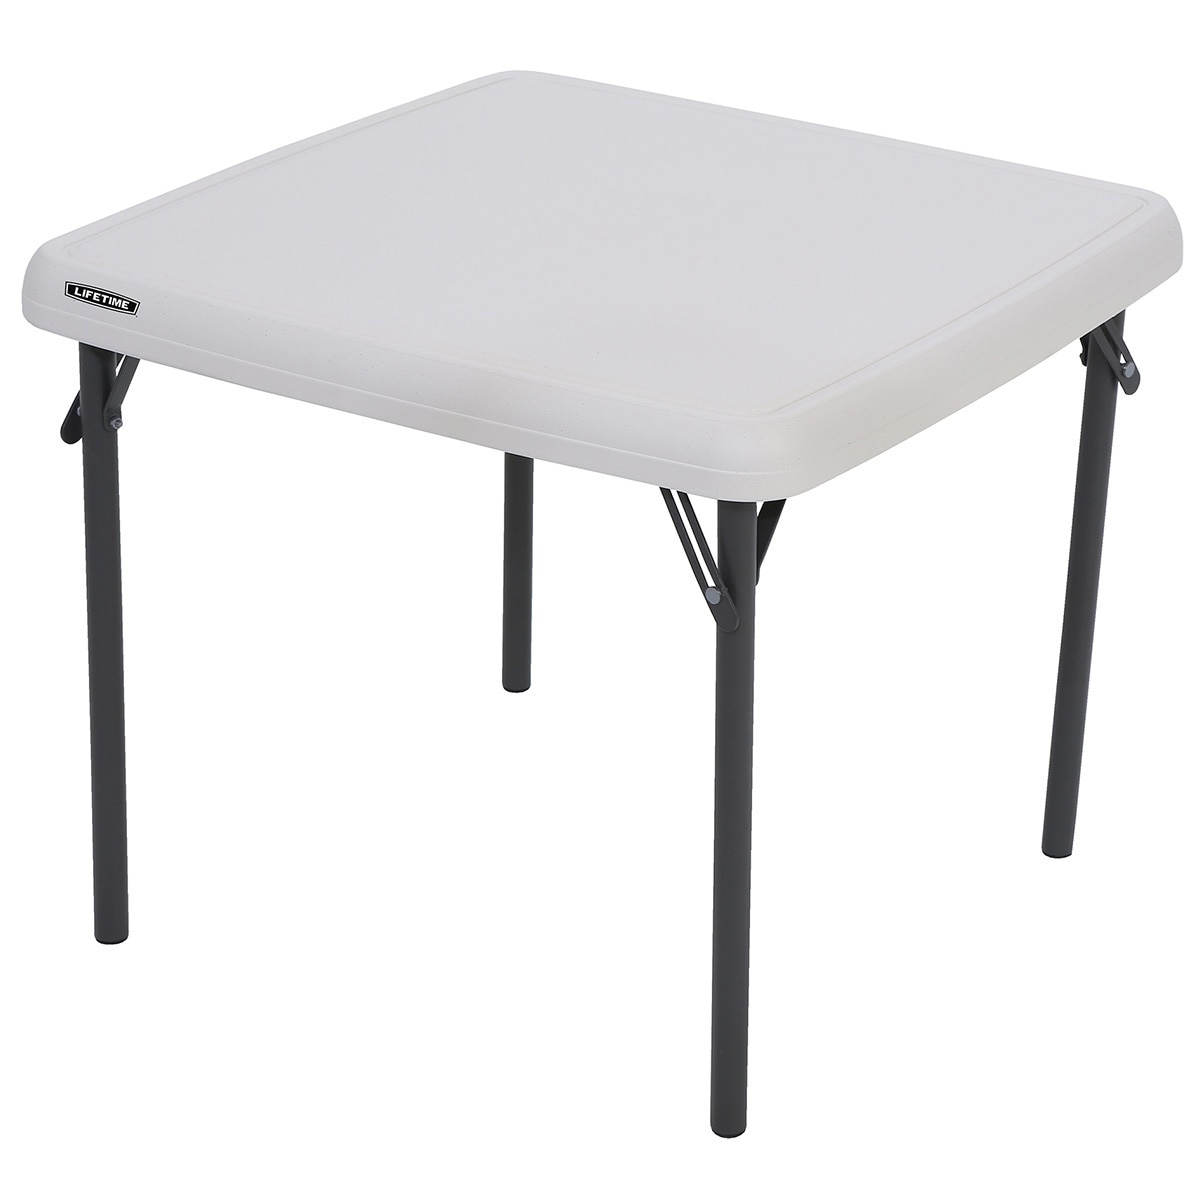 children's collapsible table and chairs